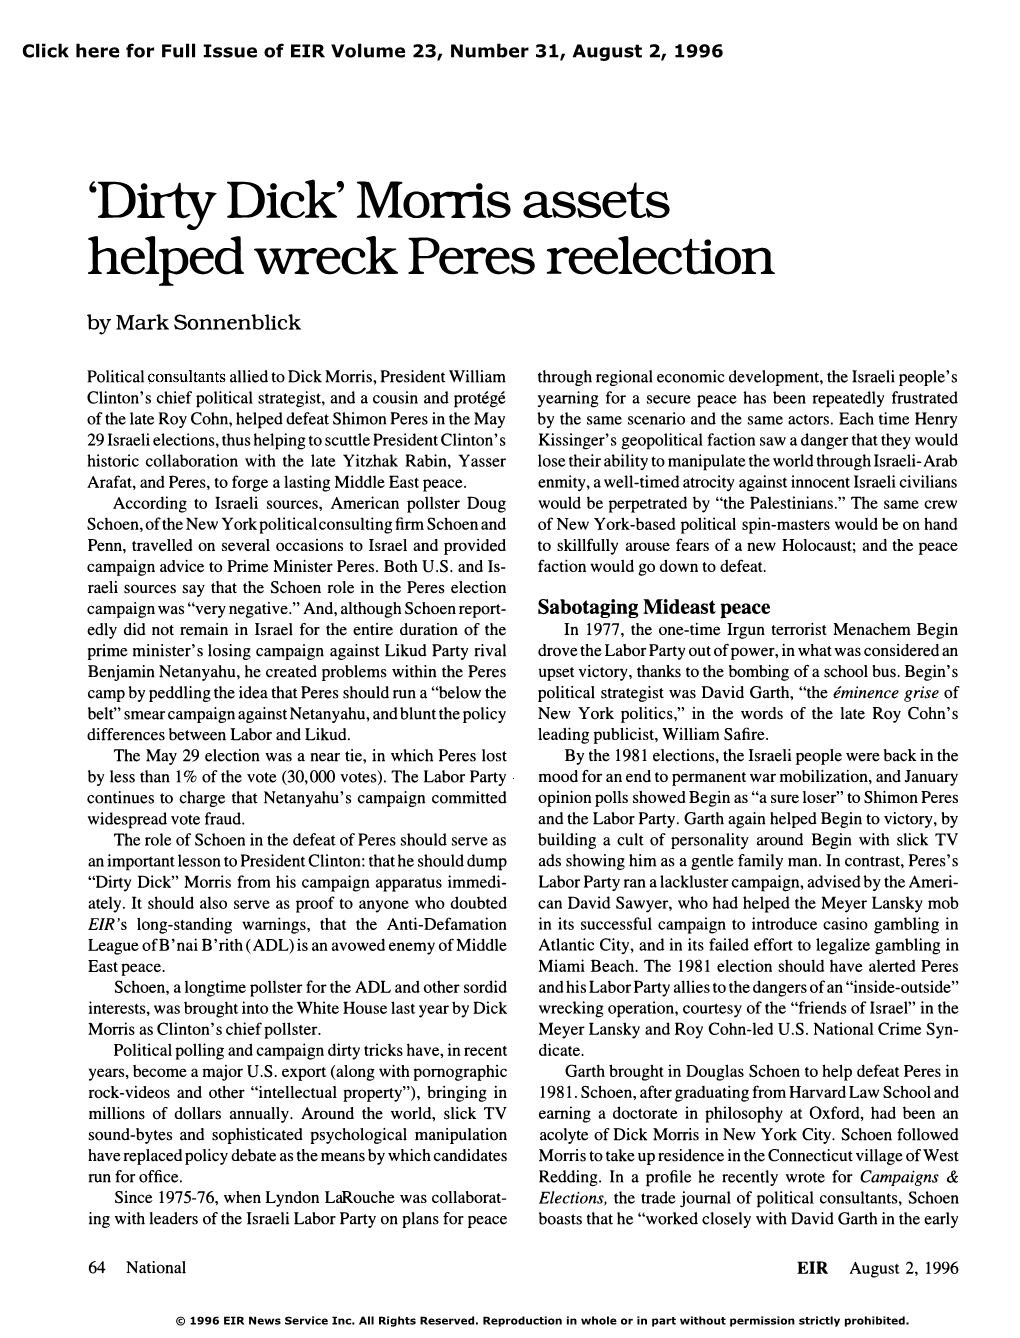 'Dirty Dick' Morris Assets Helped Wreck Peres Reelection